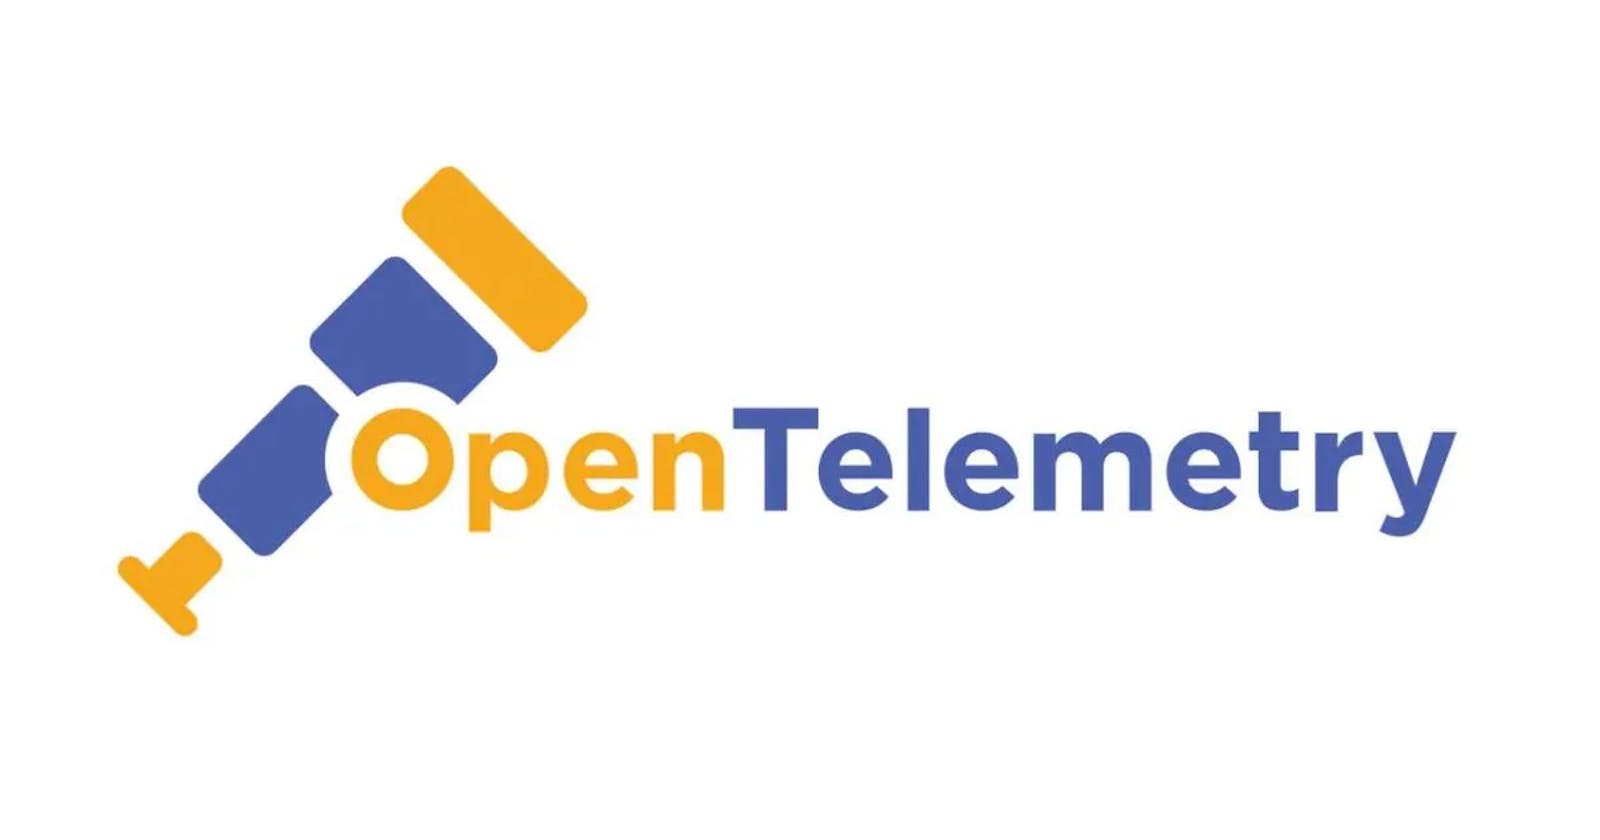 Getting Started with OpenTelemetry